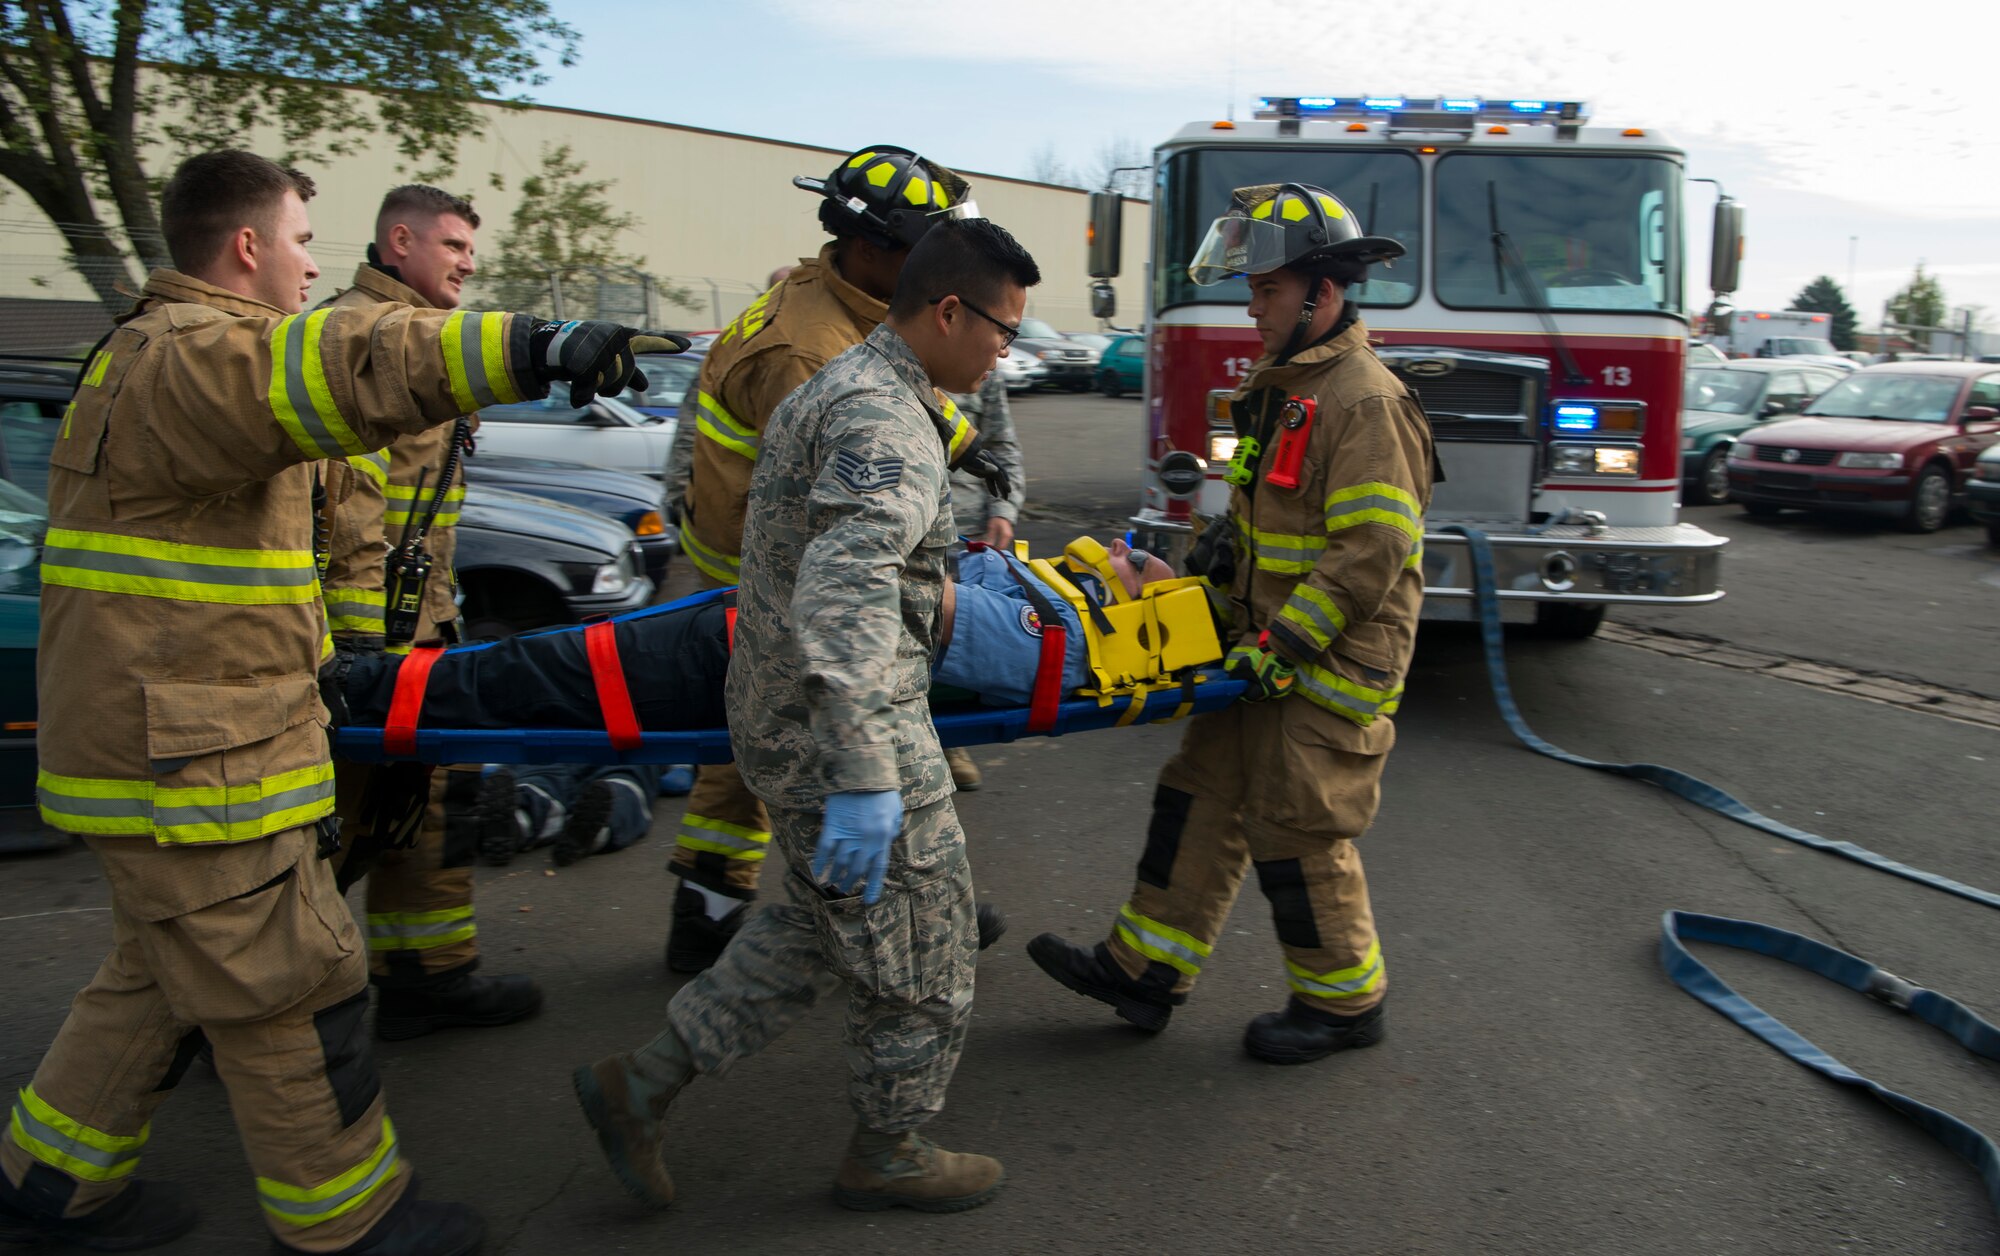 U.S. Air Force Airmen assigned to the 52nd Civil Engineer Squadron and the 52nd Medical Operations Support Squadron carry a patient from a simulated vehicle accident on Spangdahlem Air Base, Germany, Oct. 19, 2017. Airmen from the 52nd CES and 52nd MDOS train together to practice and execute skills needed for real world scenarios. (U.S. Air Force photo by Senior Airman Dawn M. Weber)